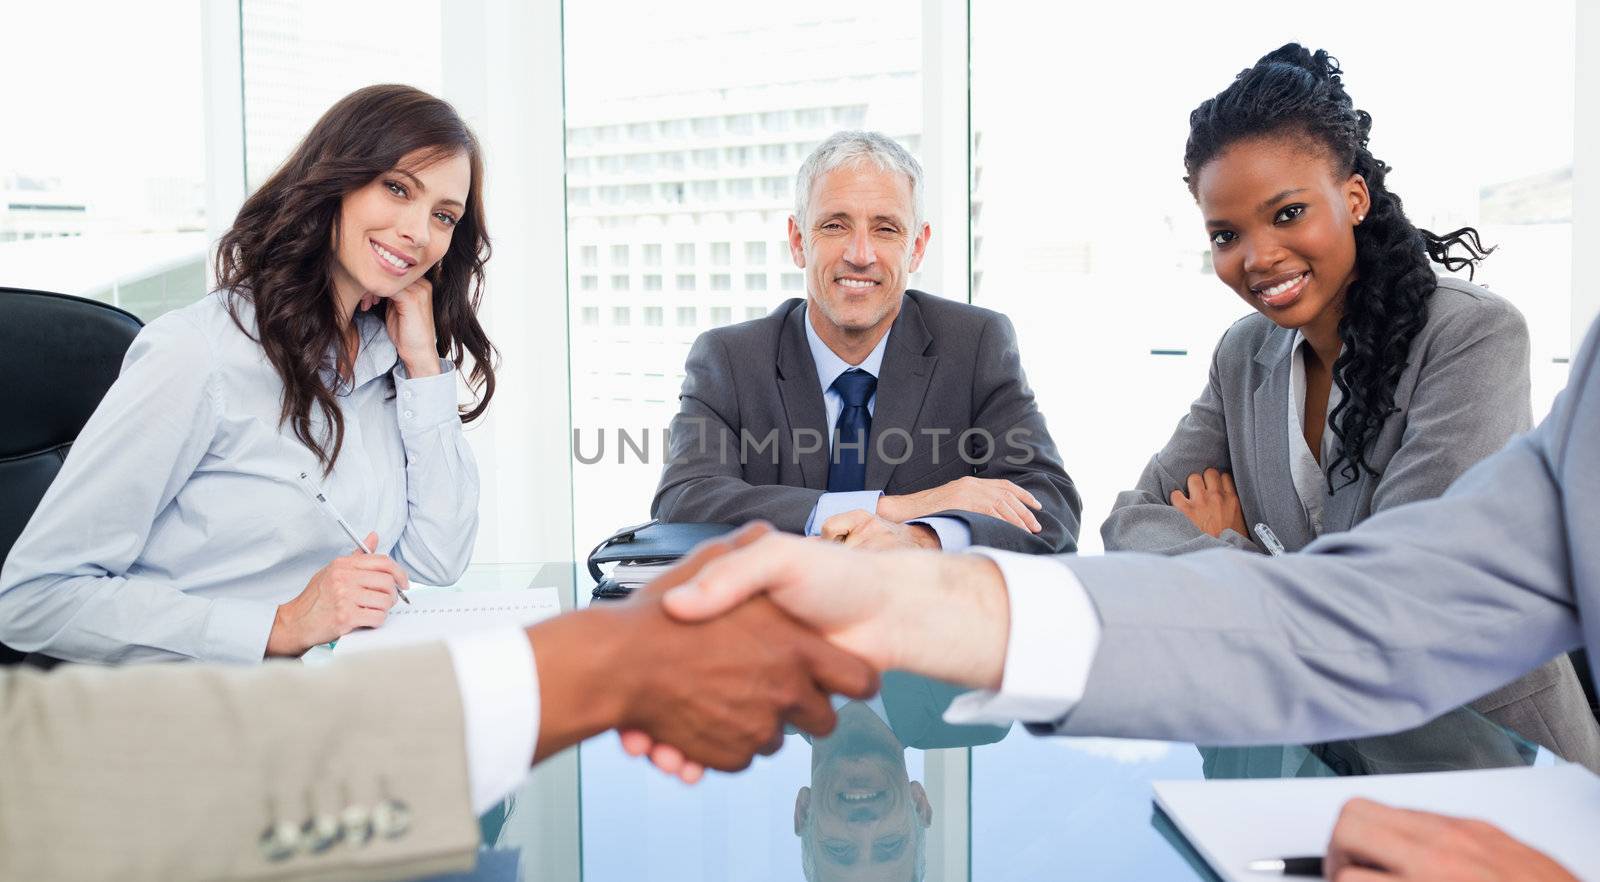 Two executives and their director smiling while looking at colleagues shaking hands